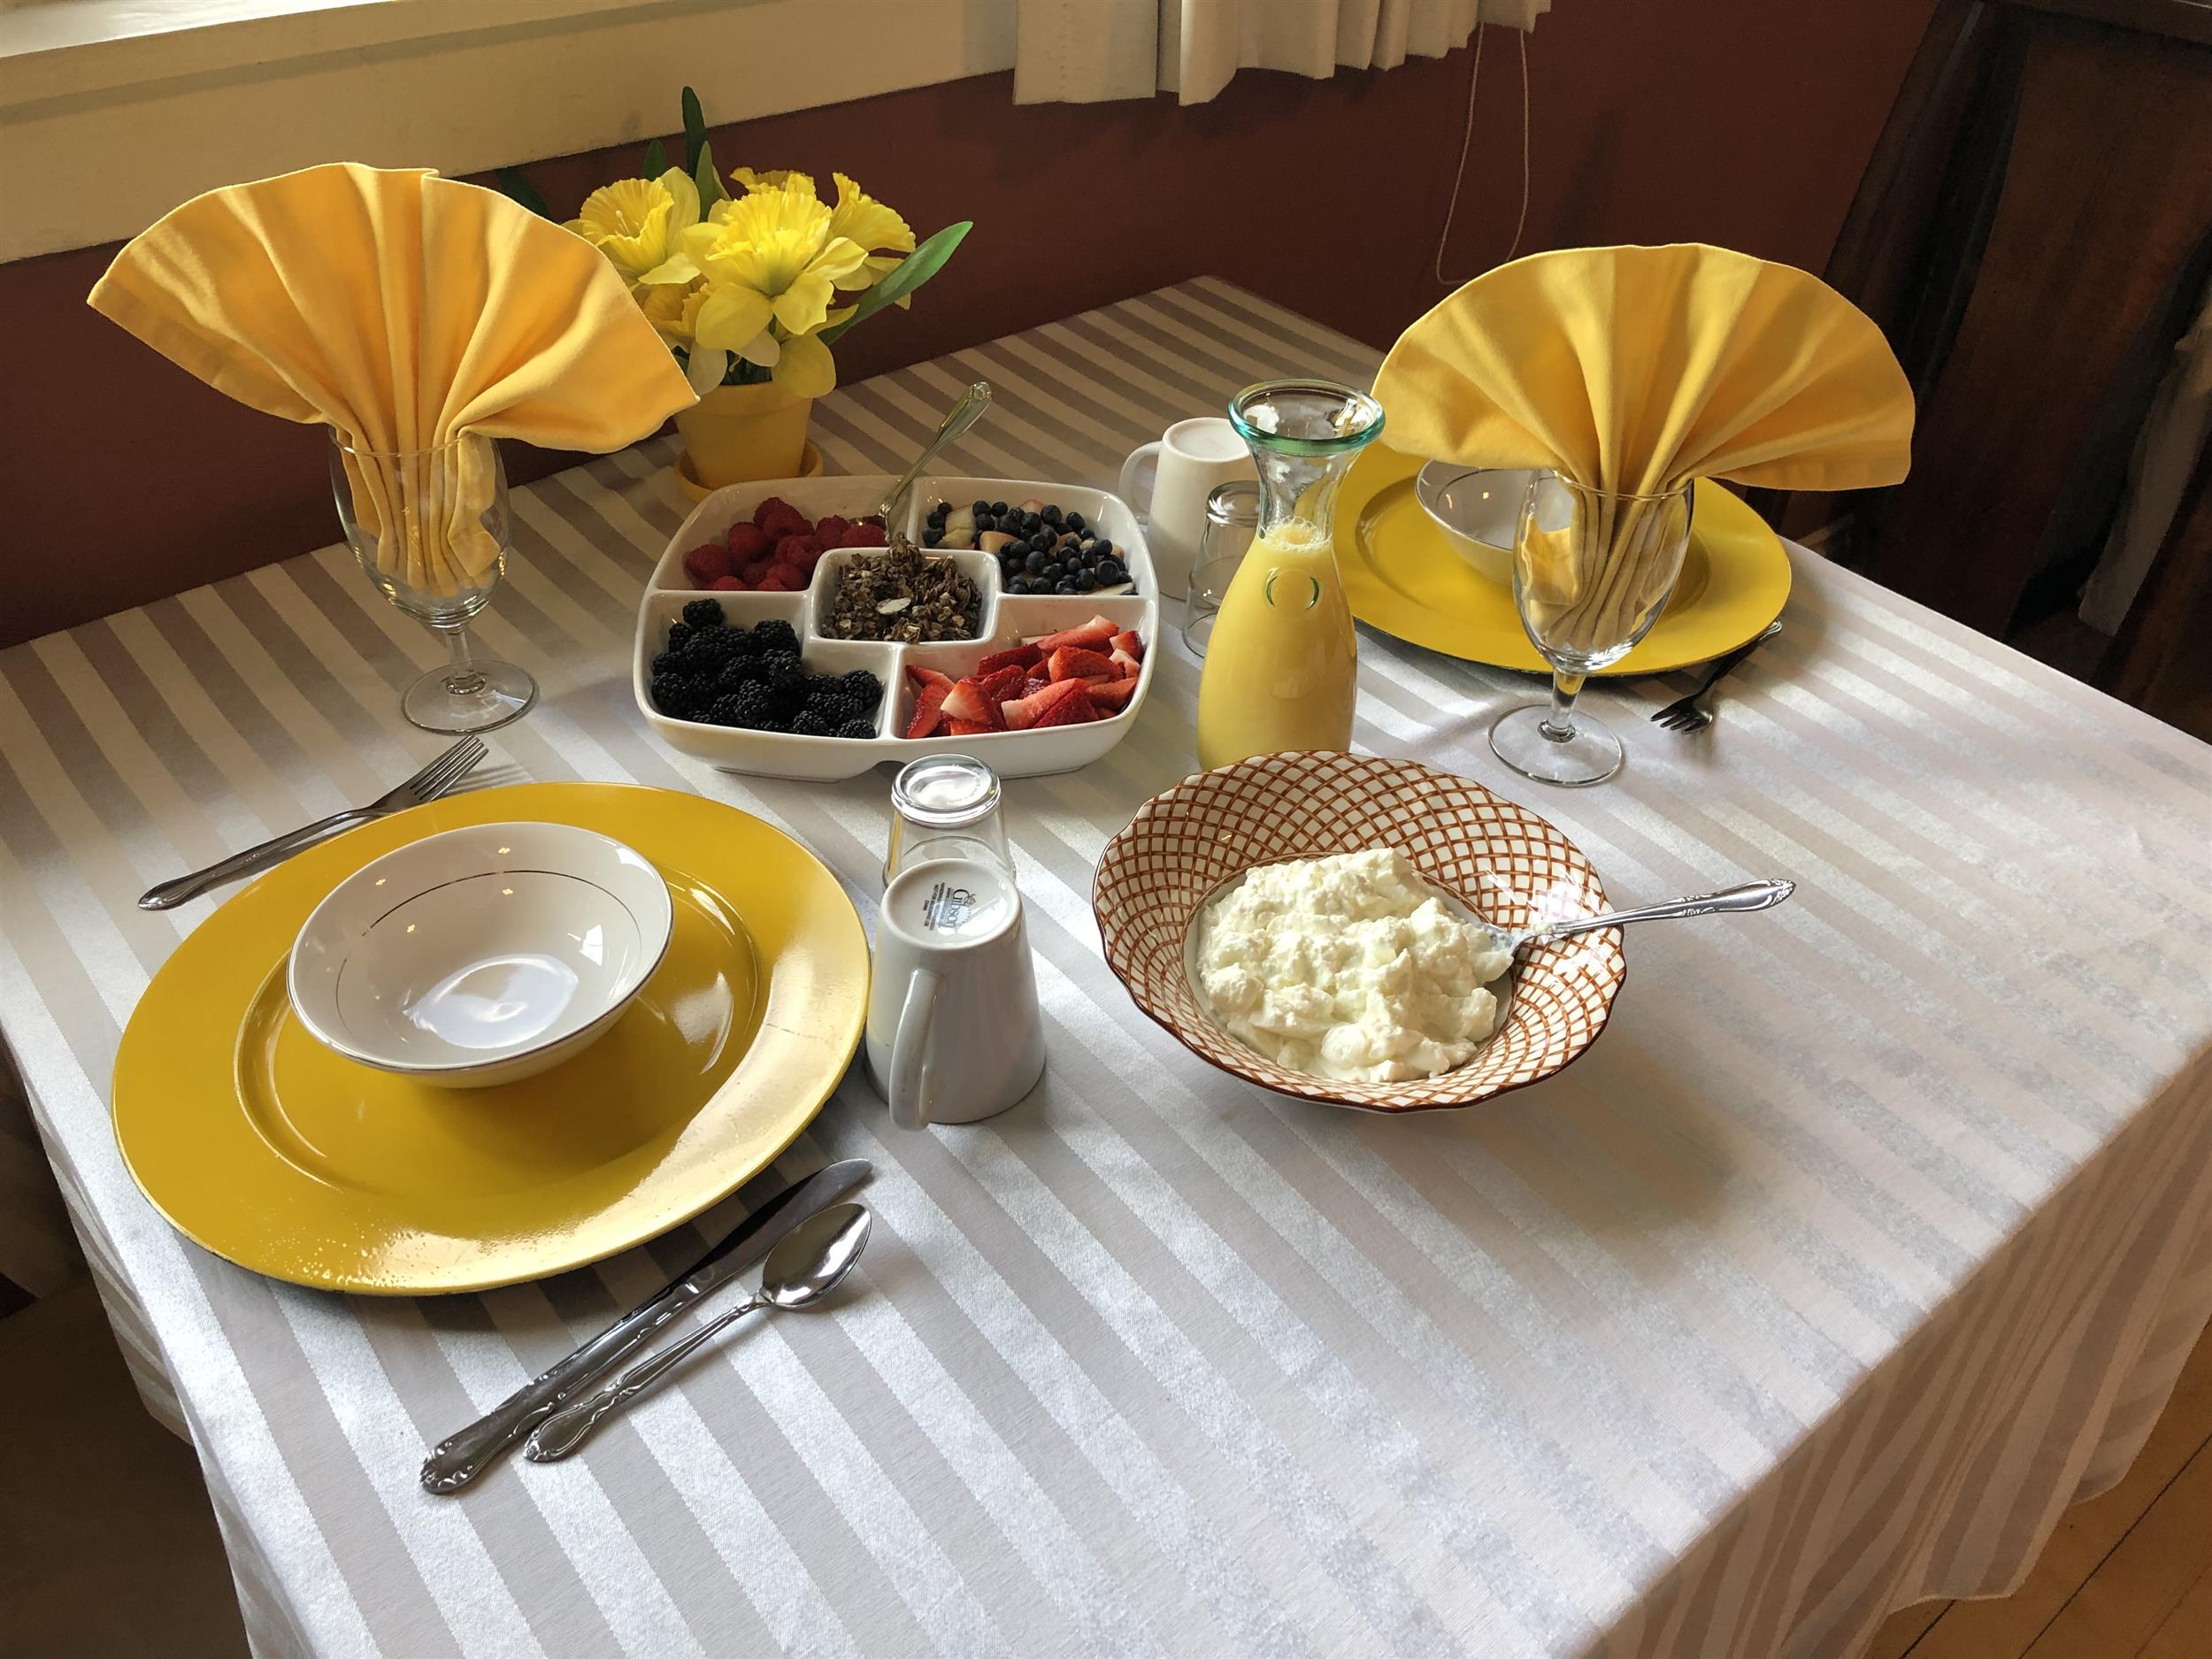 Table setting for two with yogurt and berry display